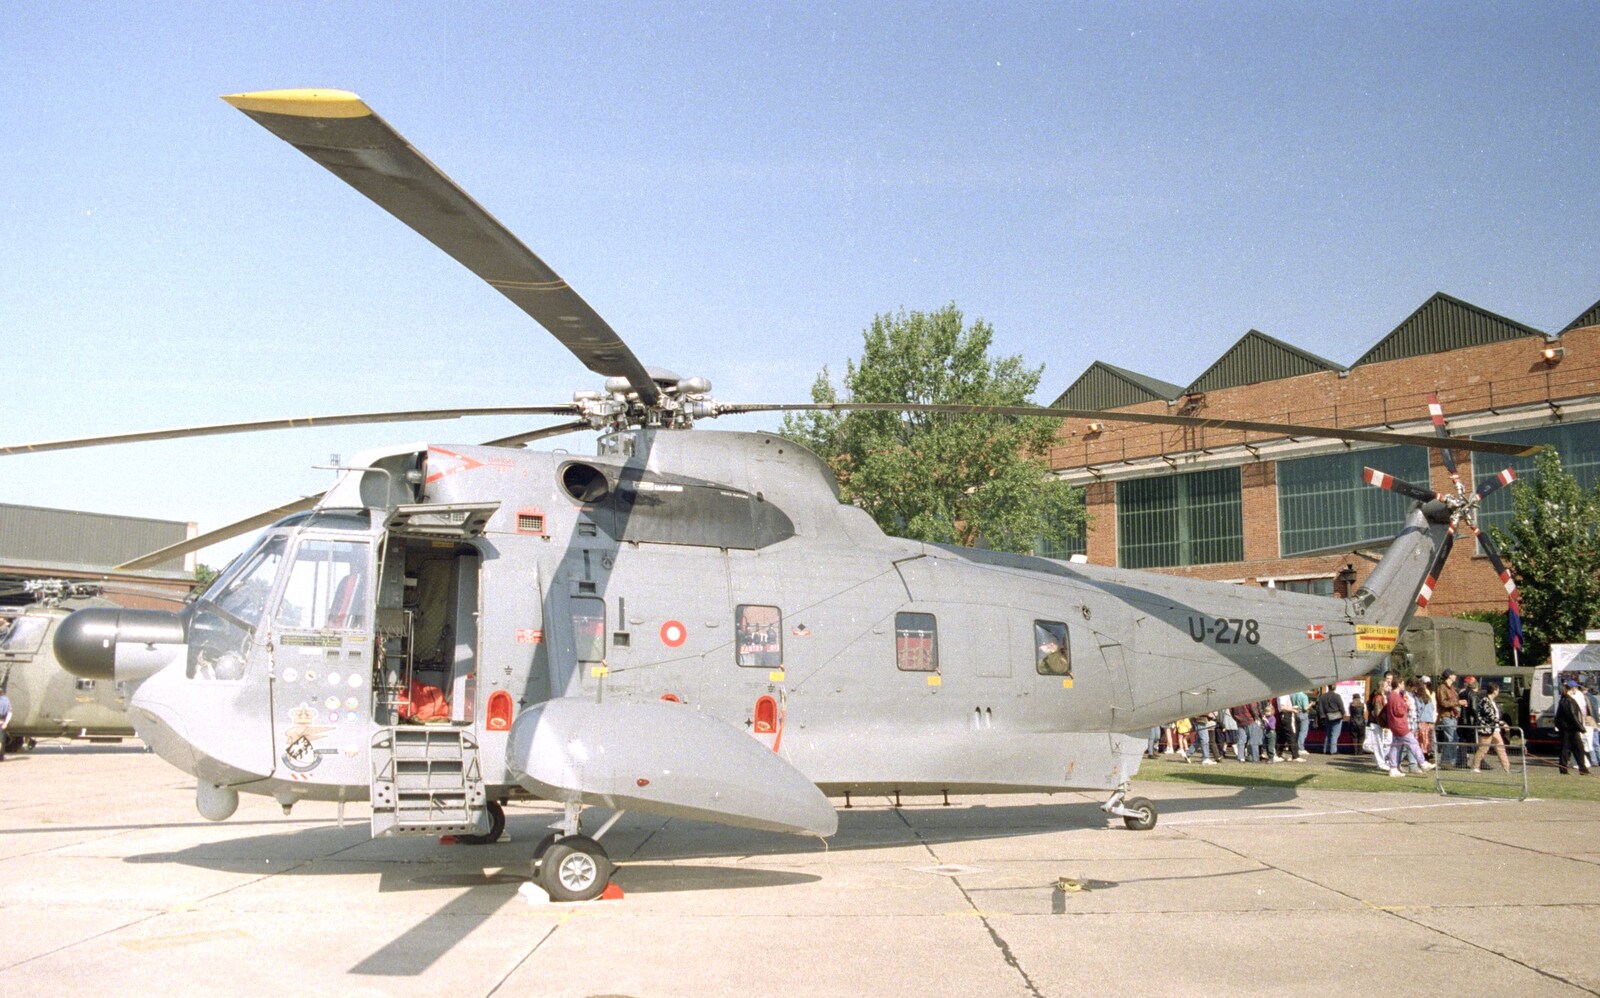 A Sea King from The Mildenhall Air Fete, Mildenhall, Suffolk - 29th May 1994